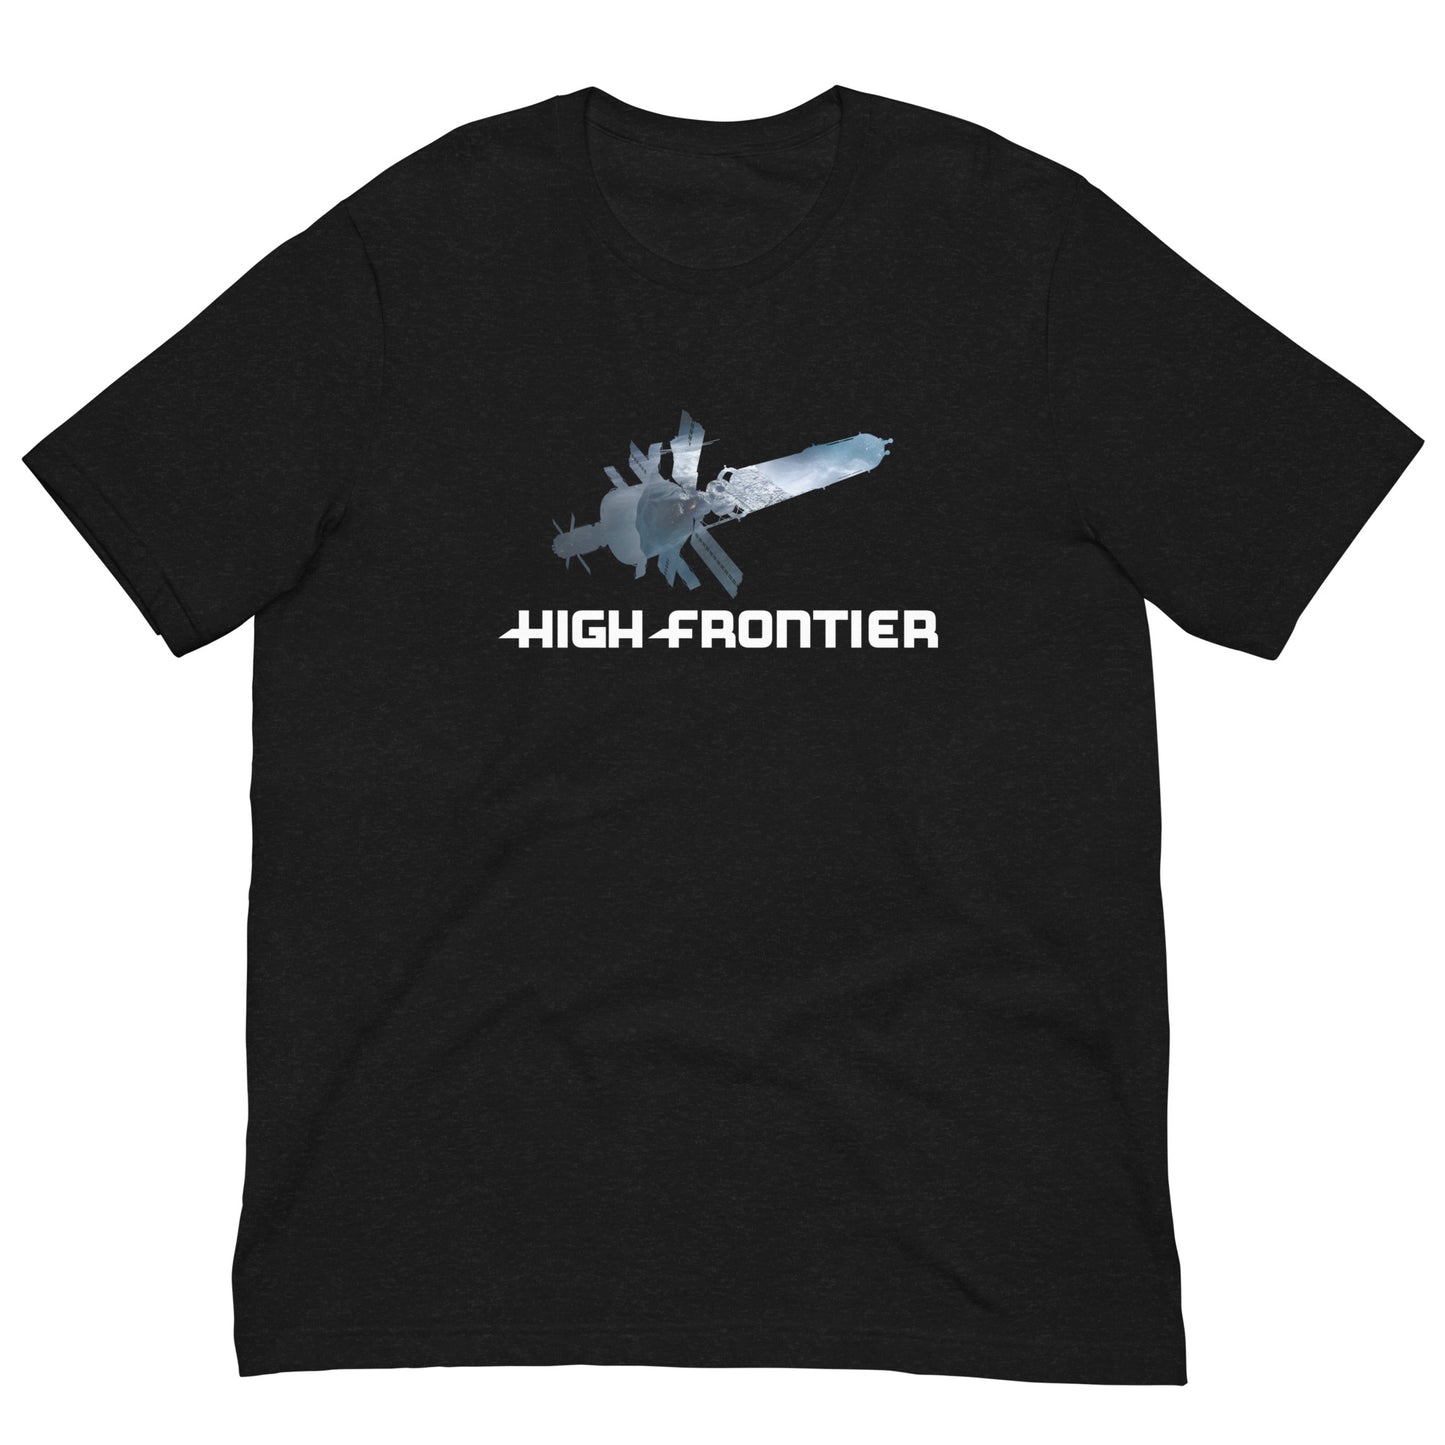 HIGH FRONTIER: Unisex t-shirt - front view off person